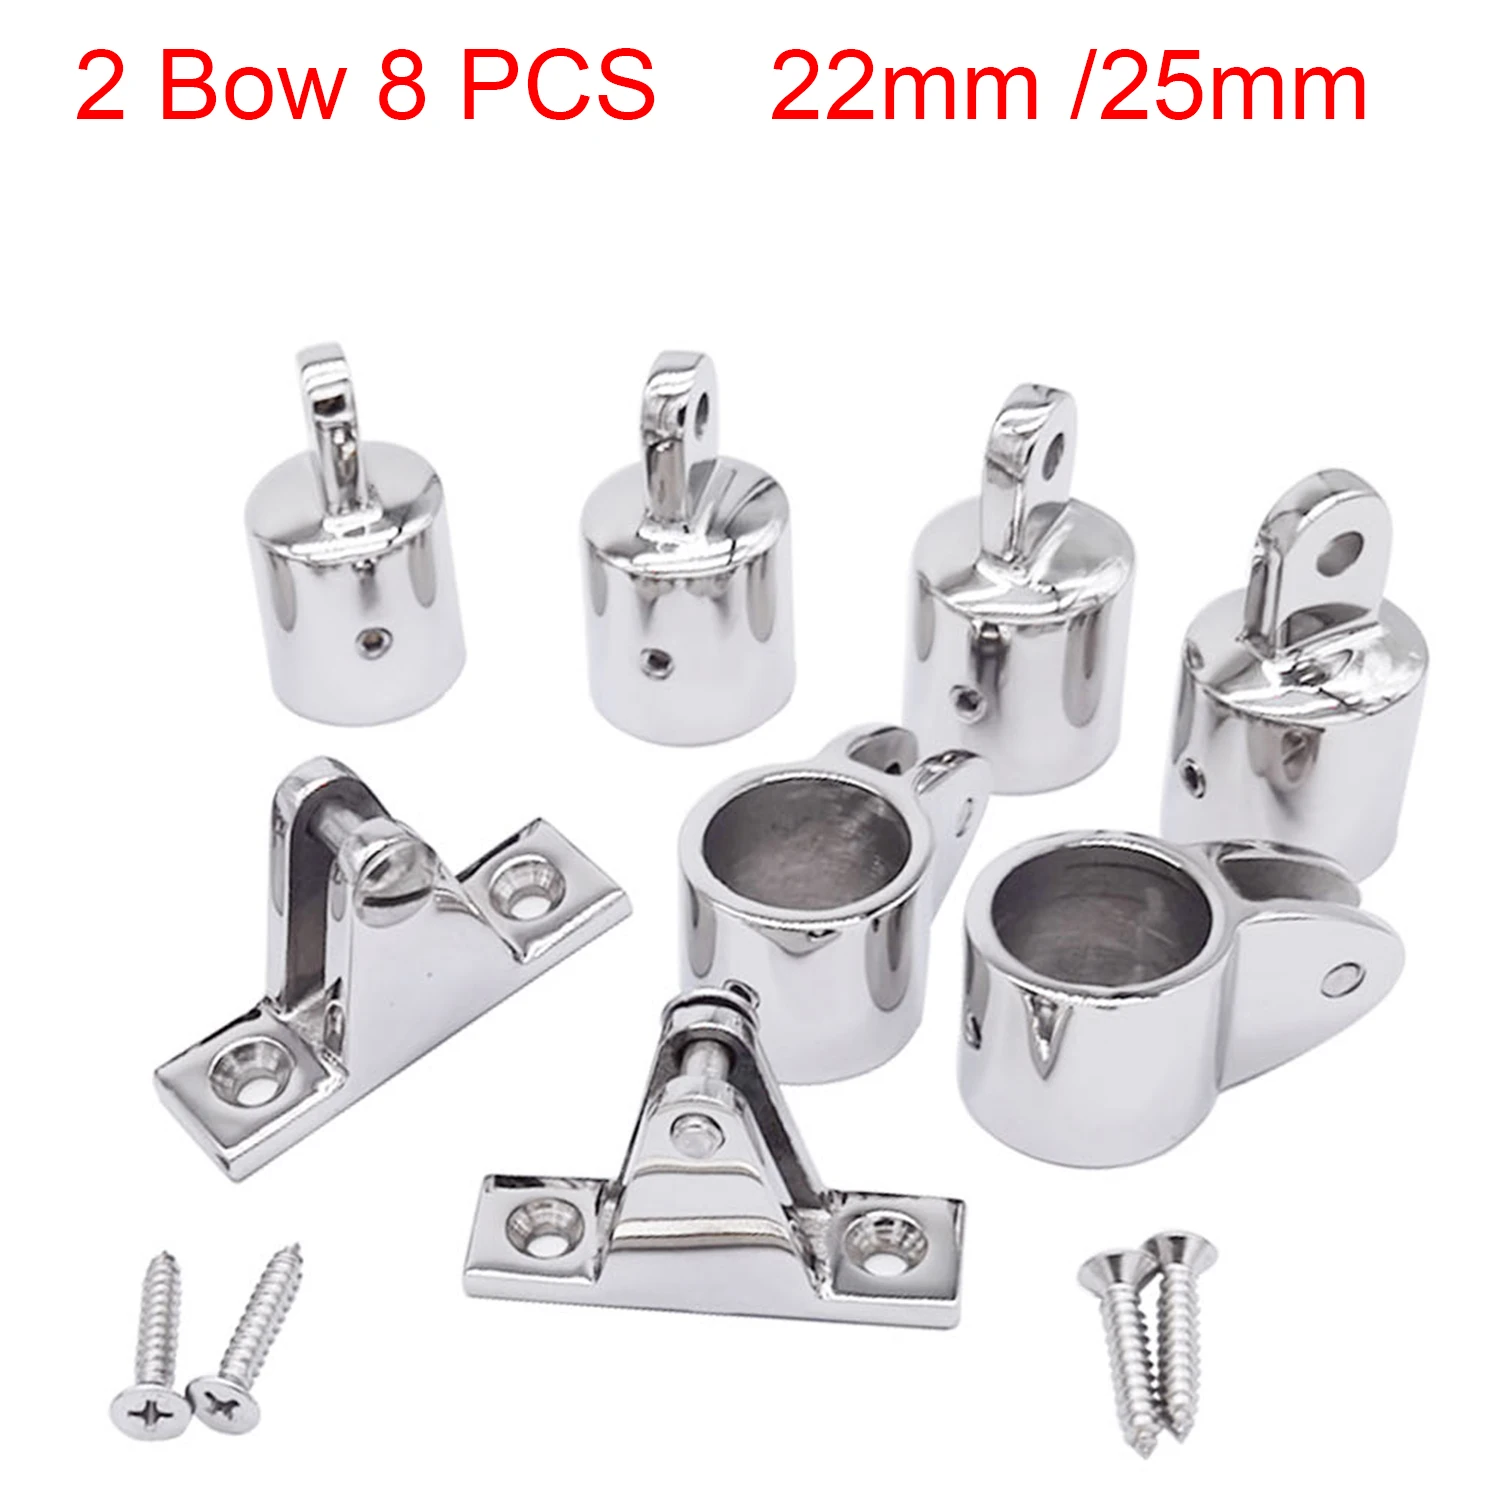 8 PCS Marine 316 Stainless Steel 2-Bow Bimini Top Hardware Fitting Set Deck Hinge Jaw Slide Eye End Fitting for 22/25mm Pipe heavy duty marine grade 316 stainless steel boats yacht hand rail fitting 90 degree elbow for 25mm 1 pipe tubing mount hardware